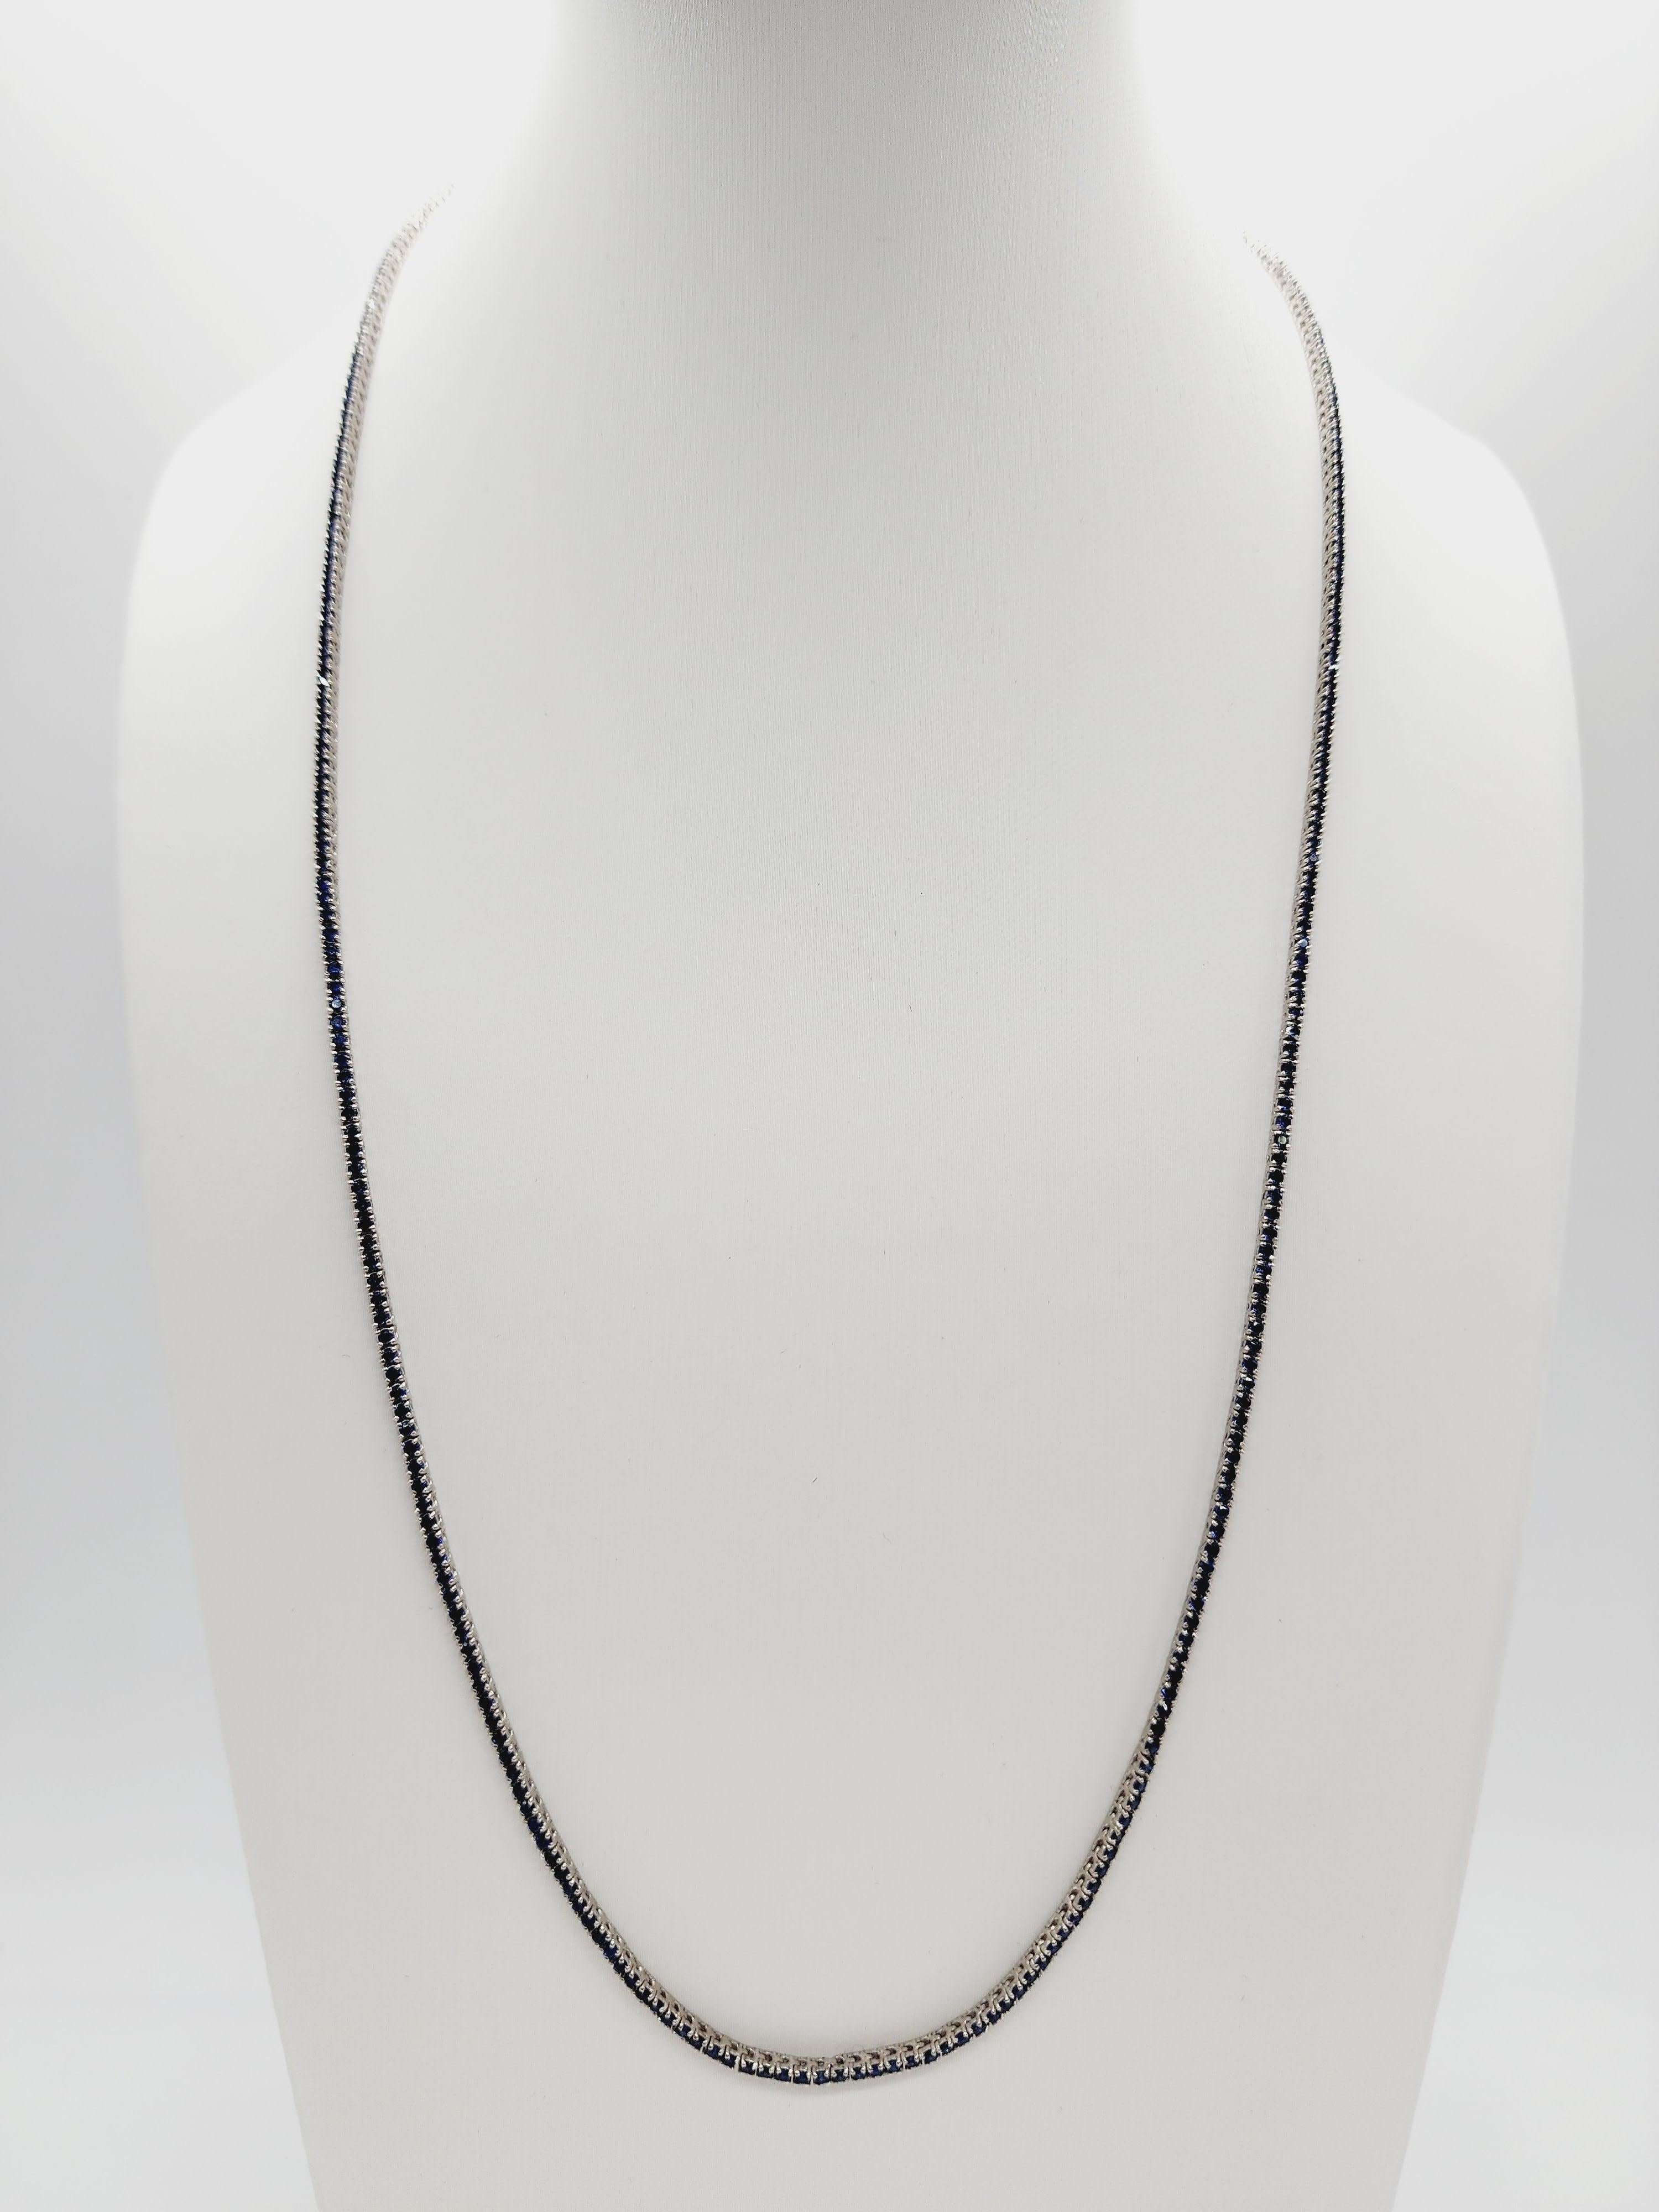 5.20 CARATS SAPPHIRE TENNIS NECKLACE WHITE GOLD 14K, 
22 INCH, 1.5 MM WIDE.

All sapphire are natural, not treated.